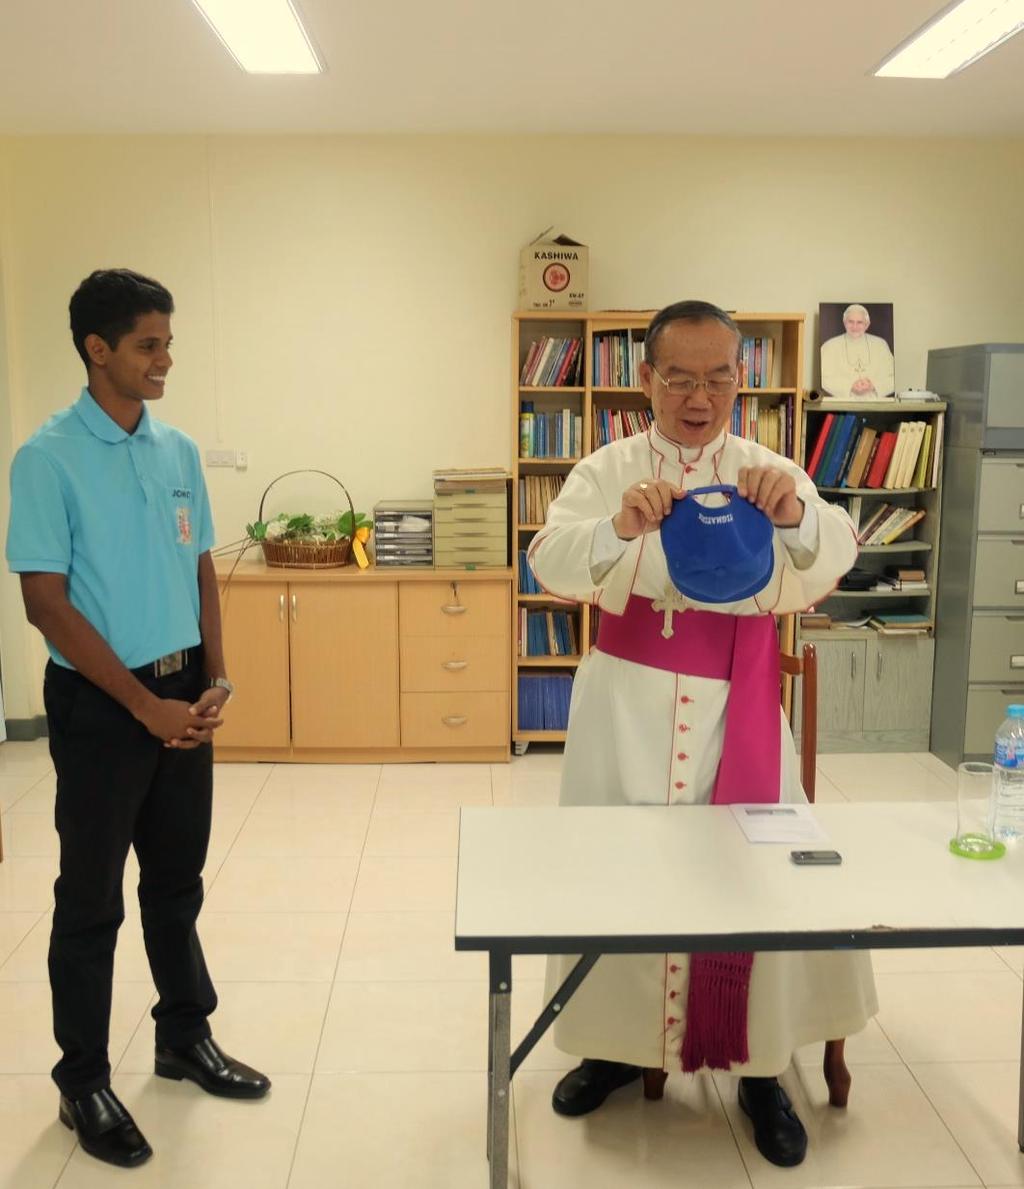 A MEMORABLE DAY WITH THE BISHOP On the 21st of December today we have had a valuable opportunity to stay recollected with Bishop Joseph Pratan, the bishop of Surathani diocese.